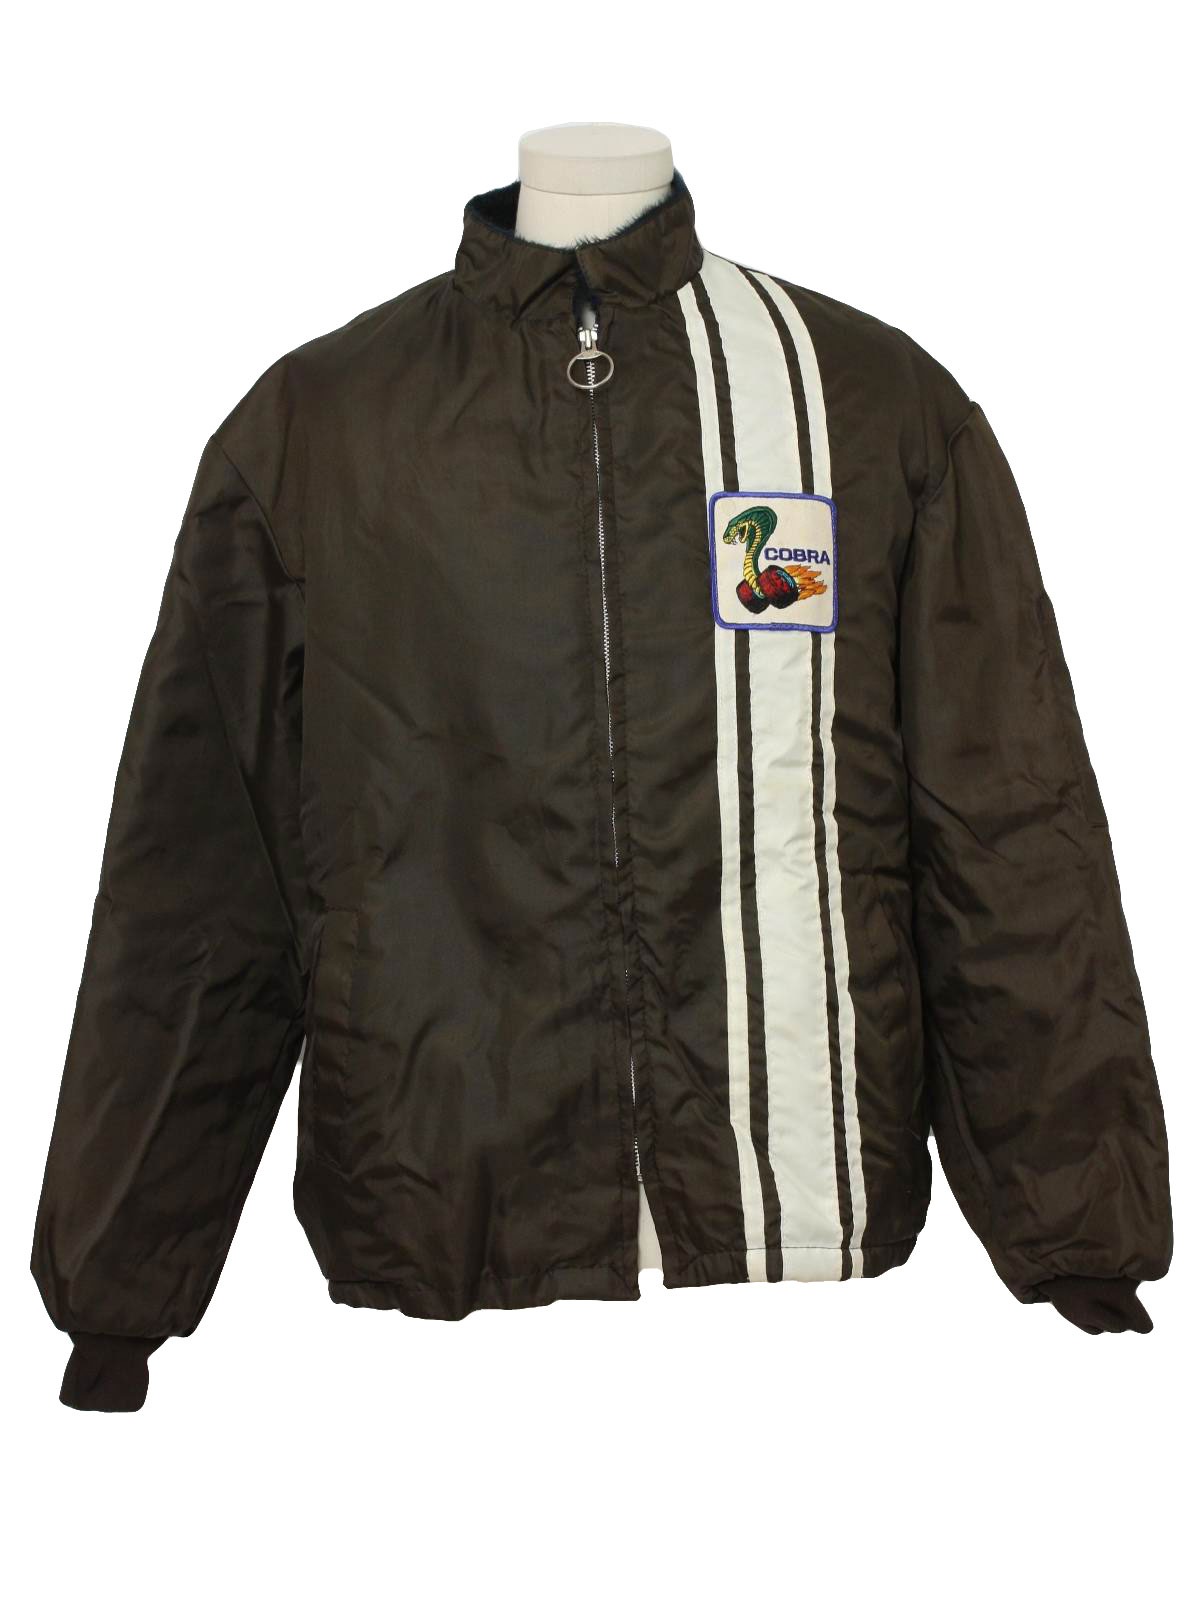 Ford racing jacket with cobra logo on it #1